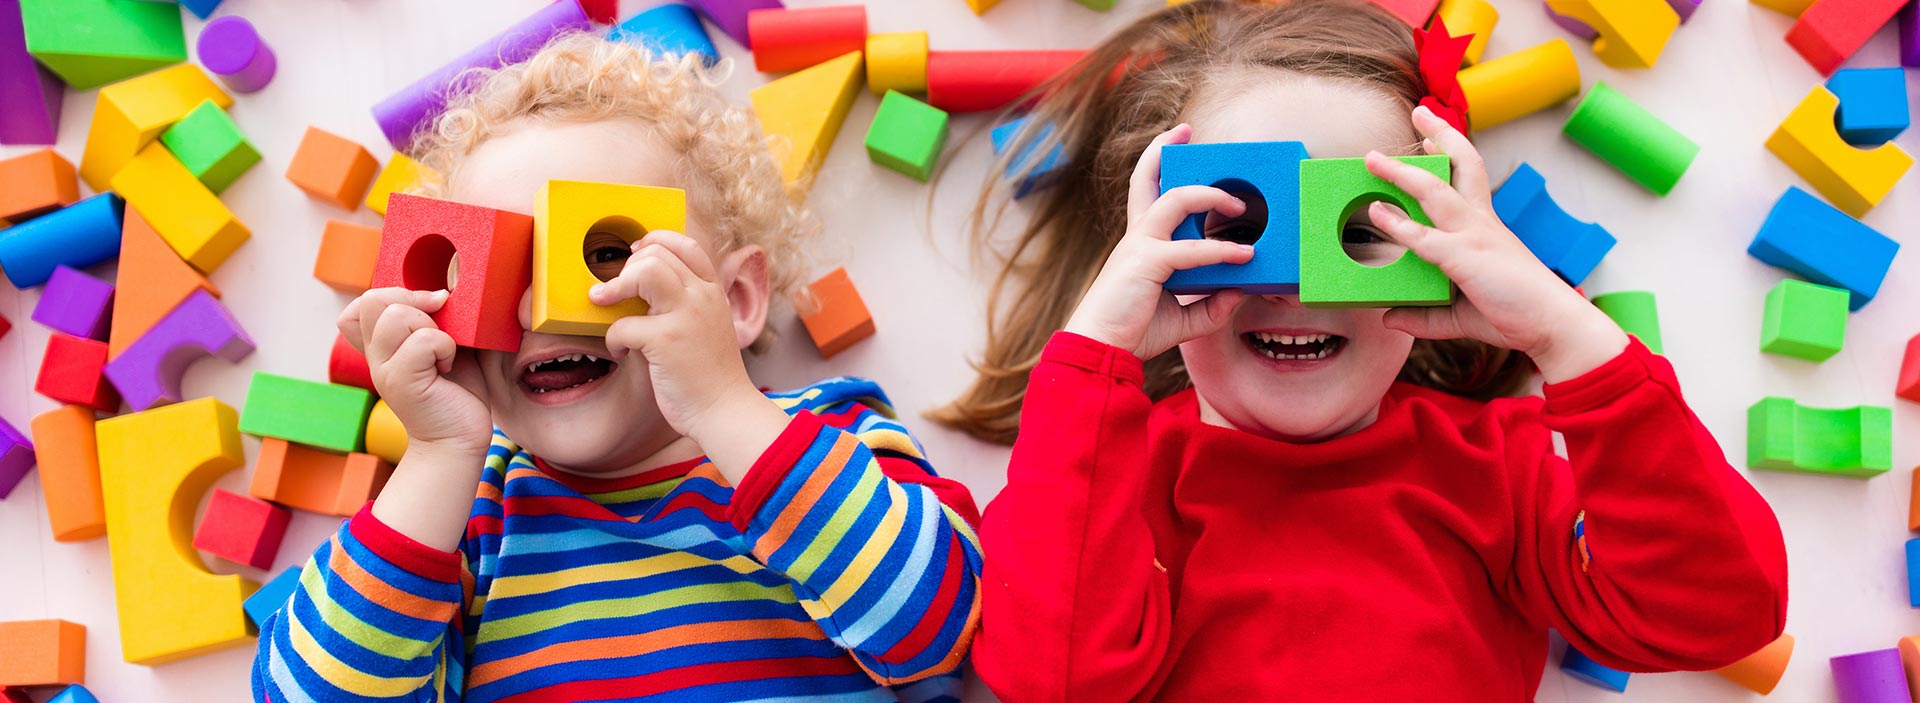 image showing two children playing with colourful sponge blocks